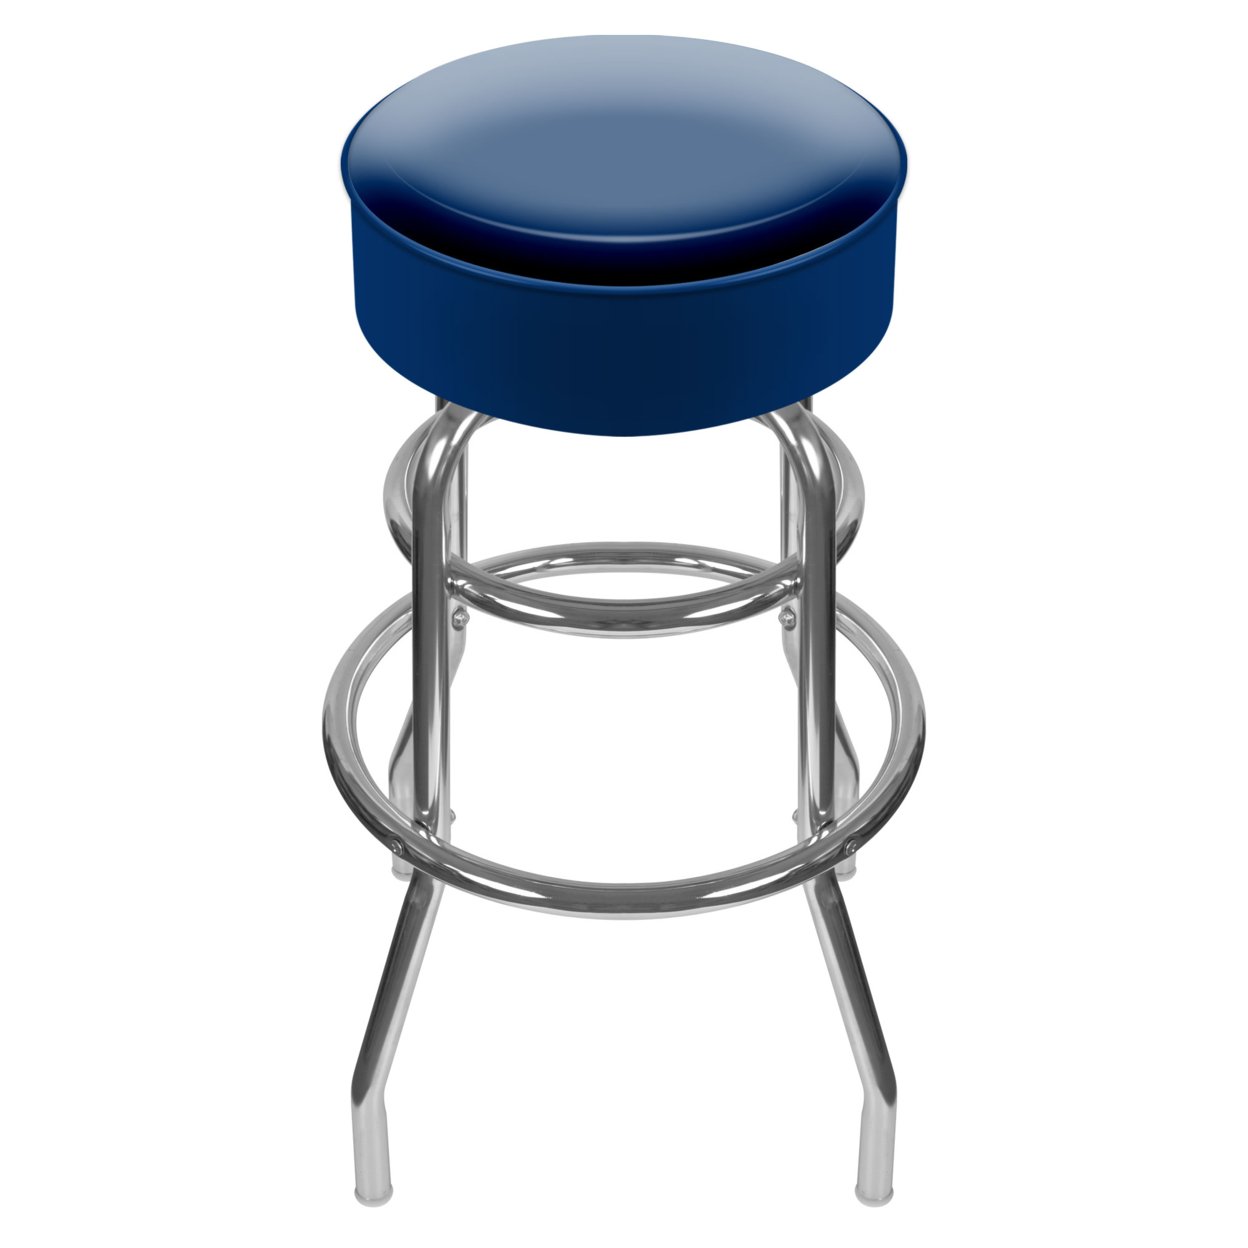 ADG Source High Grade Blue Padded Swivel Bar Stool 30 Inches High 30 Inches High